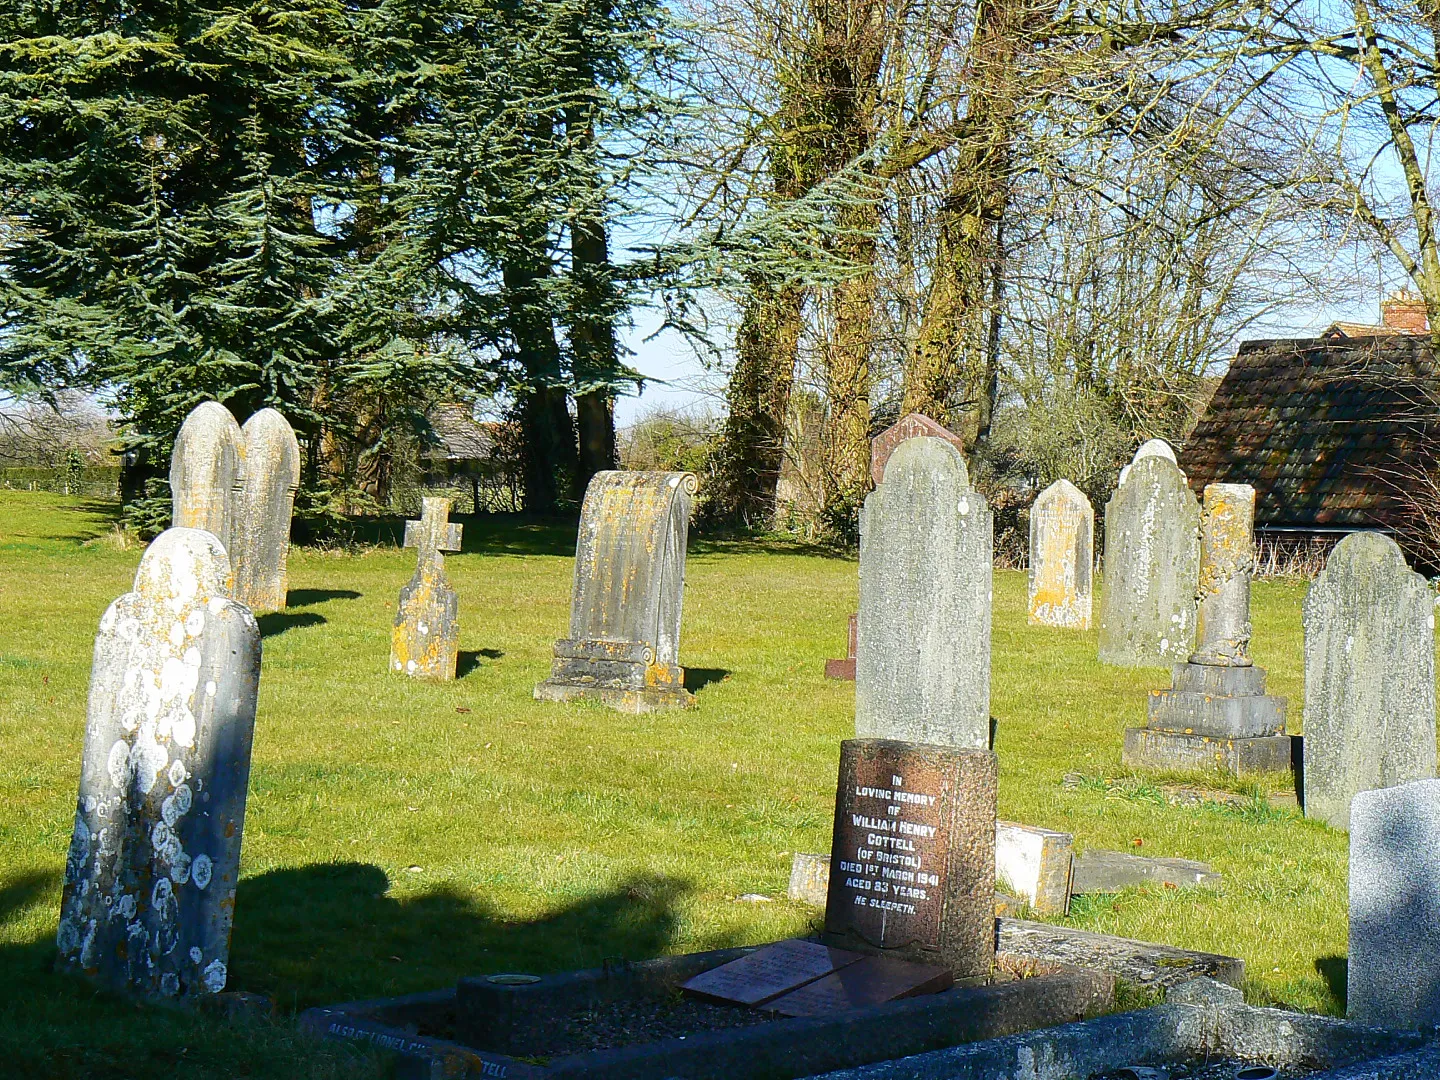 Photo showing: Churchyard, St John the Baptist, Chirton. The churchyard is quite large. This shows the part south of the church itself. The truncated pillar grave marker seen in this image 1742226 is at the right.